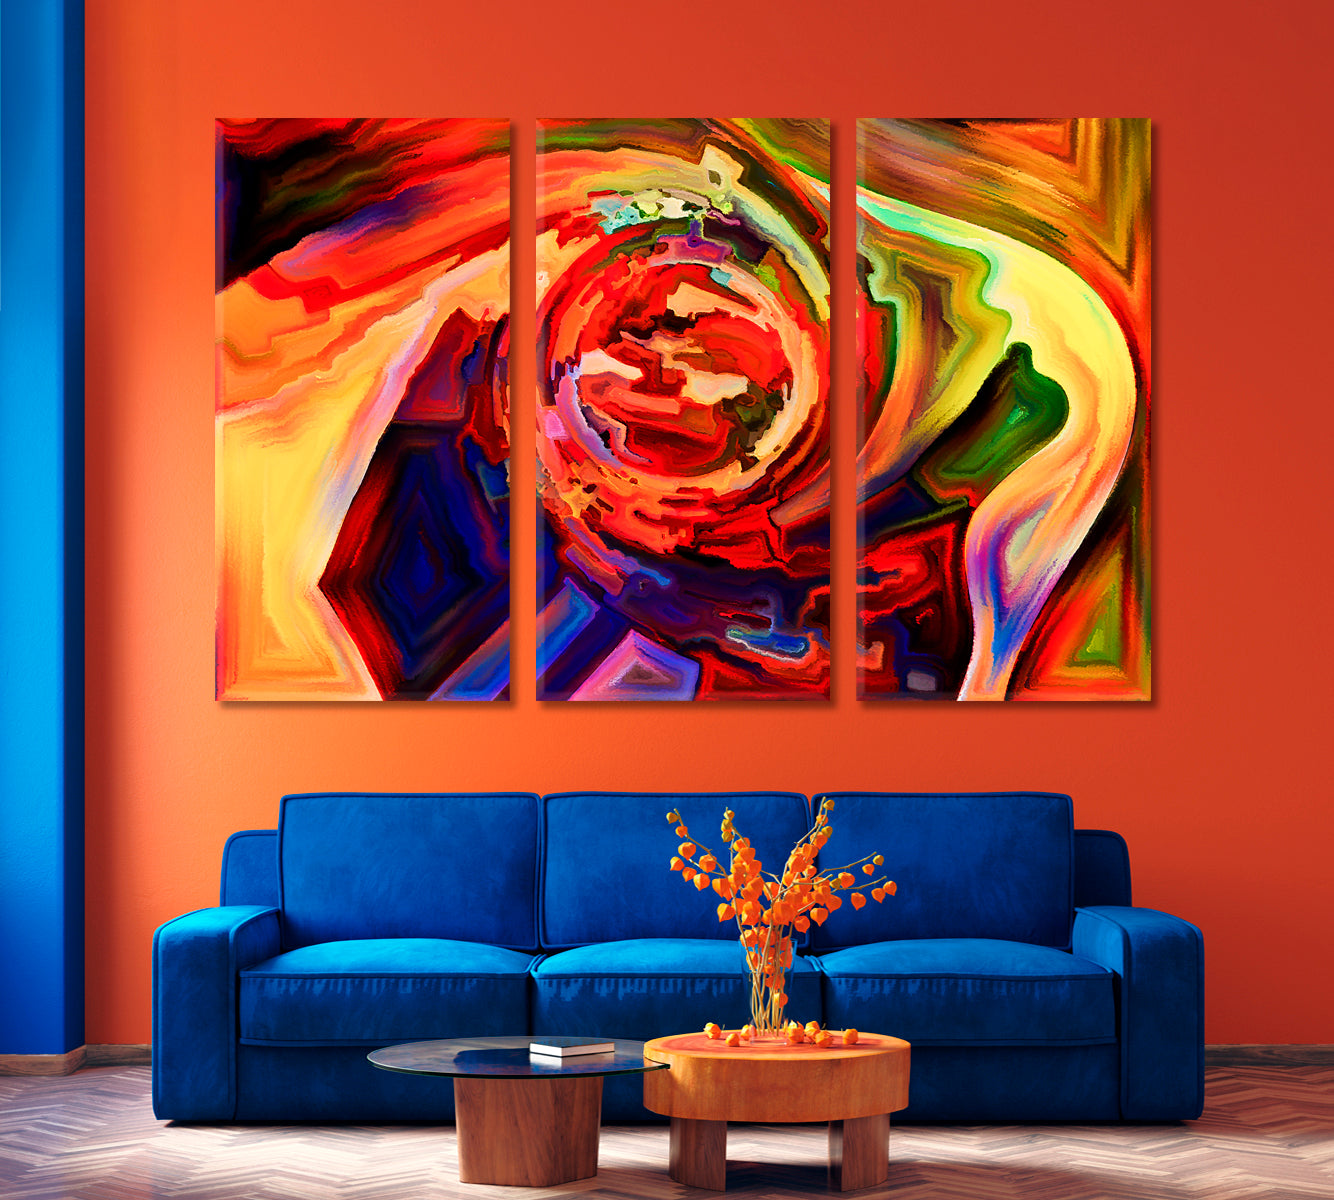 Color Flow Abstraction Contemporary Art Artesty 3 panels 36" x 24" 